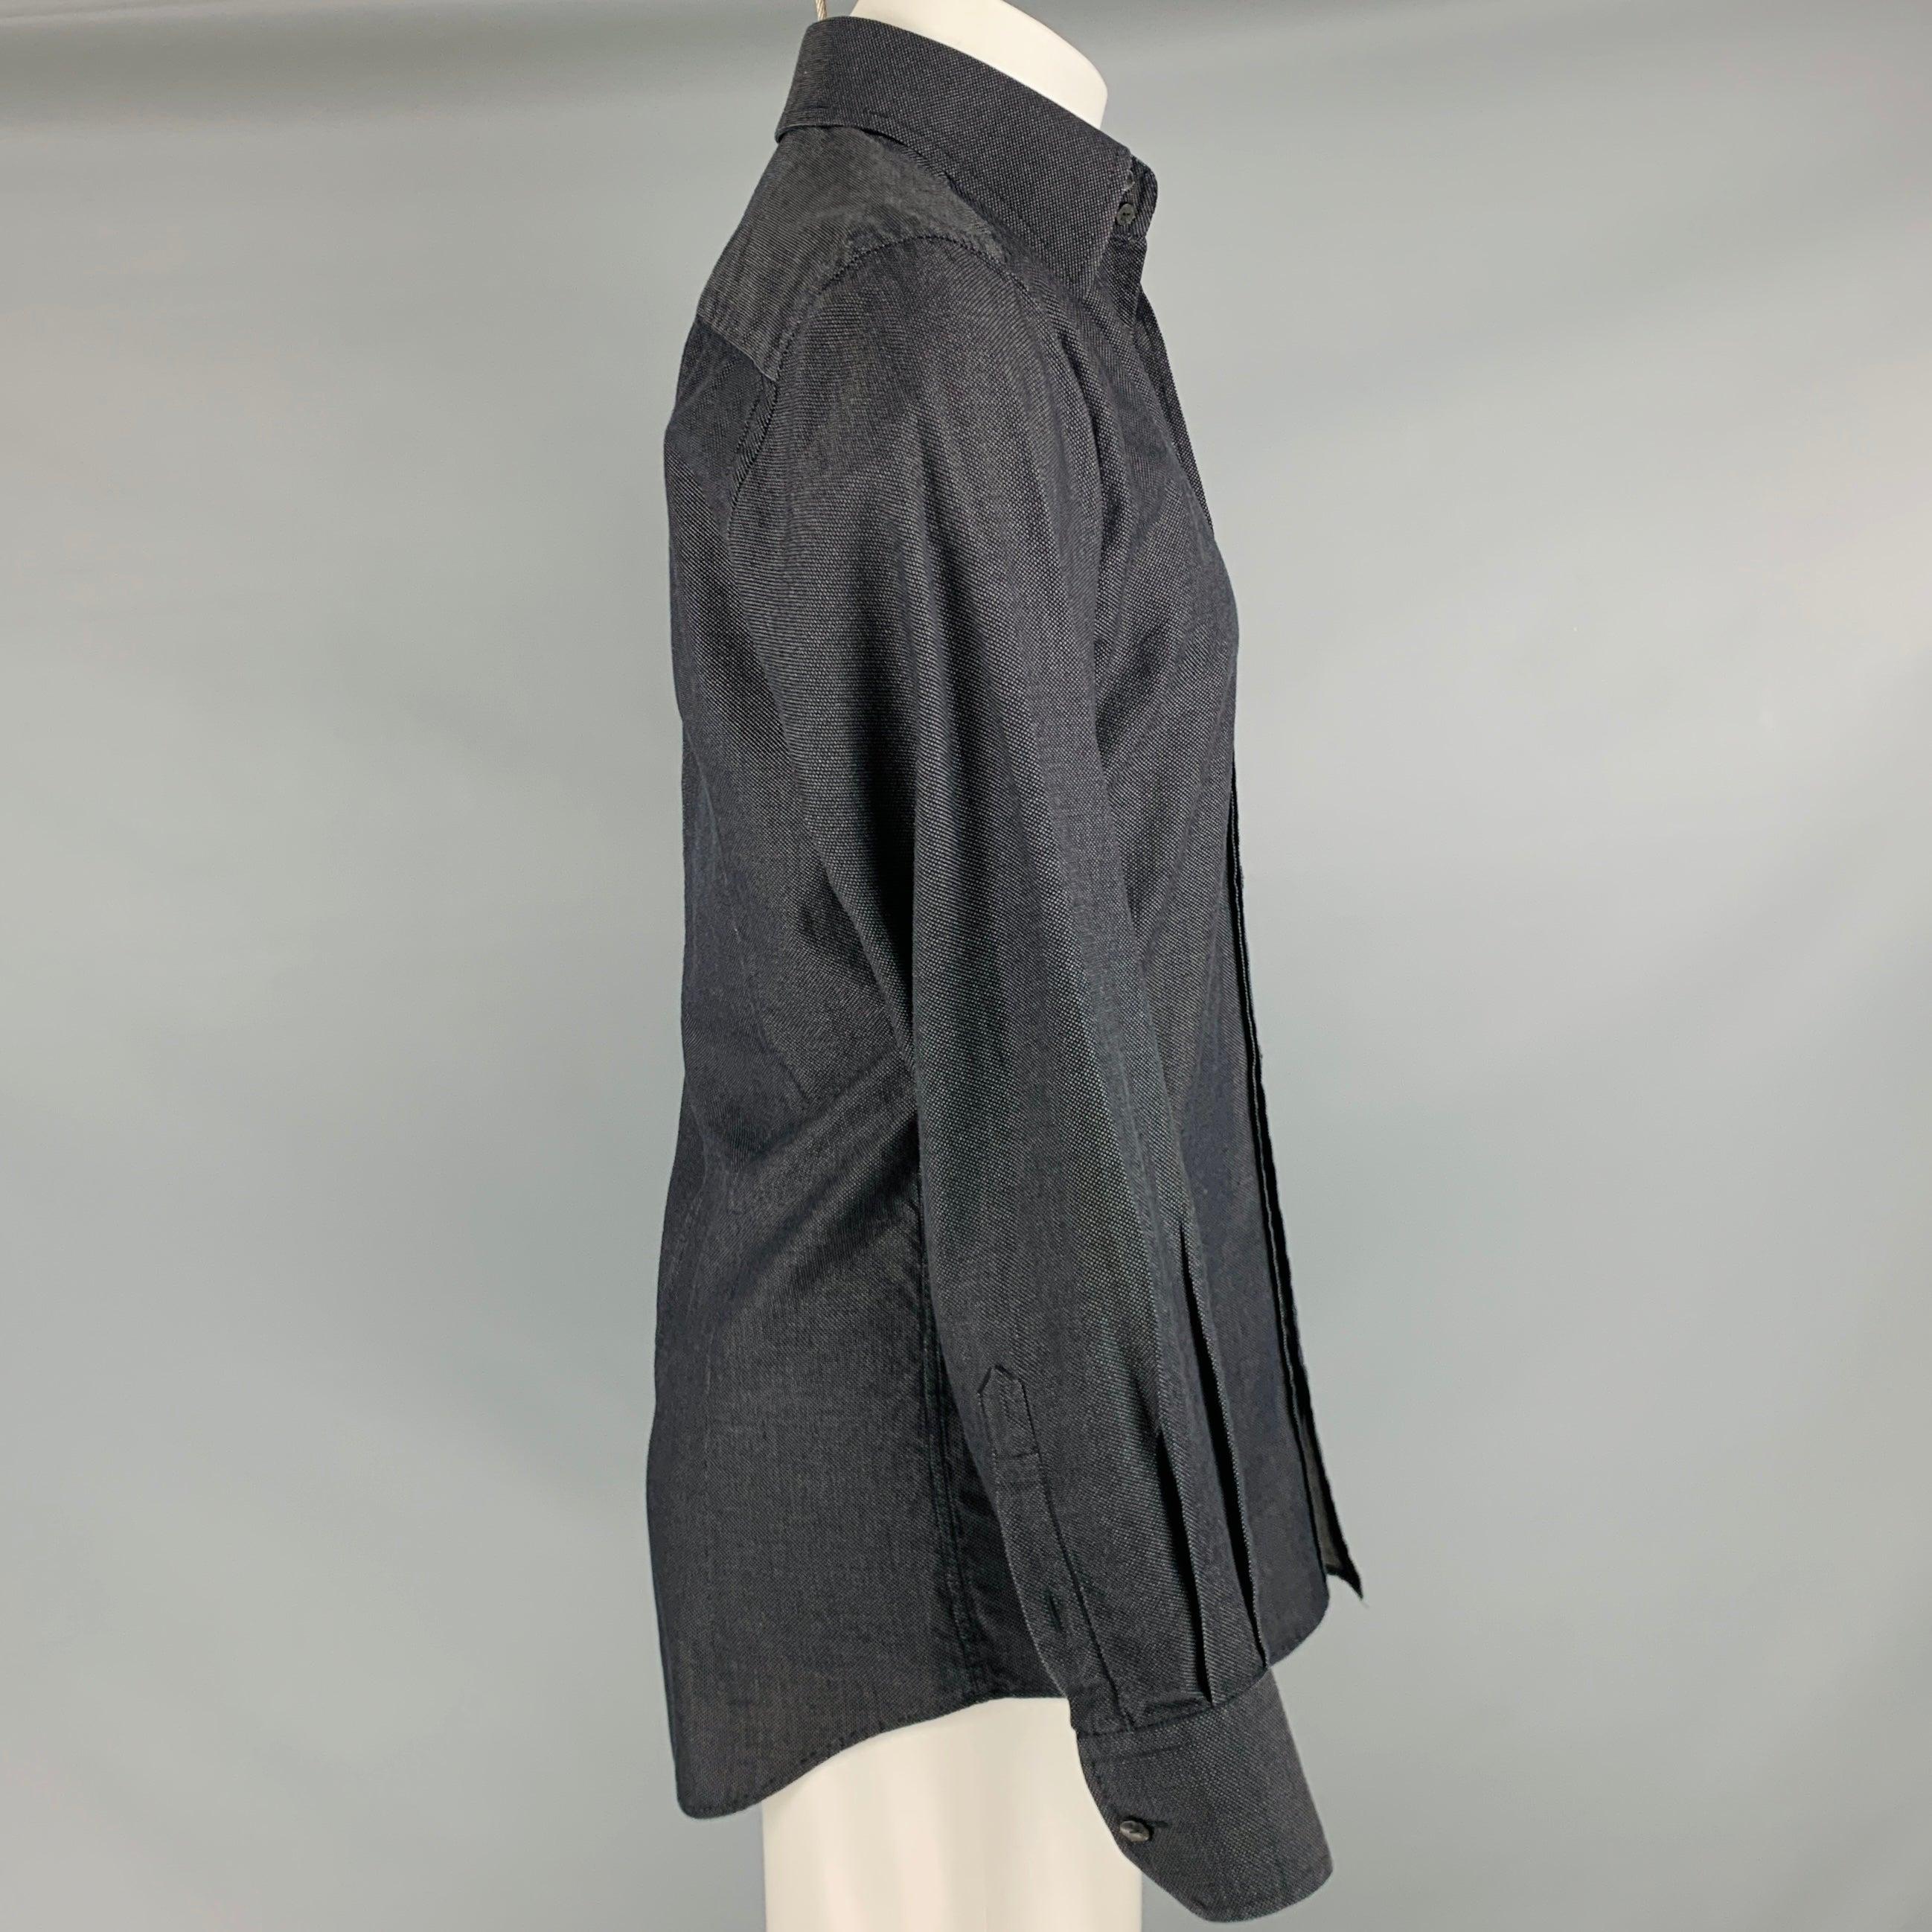 DOLCE & GABBANA long sleeve shirt
in a black cotton fabric featuring a nailhead pattern, spread collar, and button closure. Made in Italy.Very Good Pre-Owned Condition. 

Marked:   15.5/39 

Measurements: 
 
Shoulder: 17 inches Chest: 42 inches